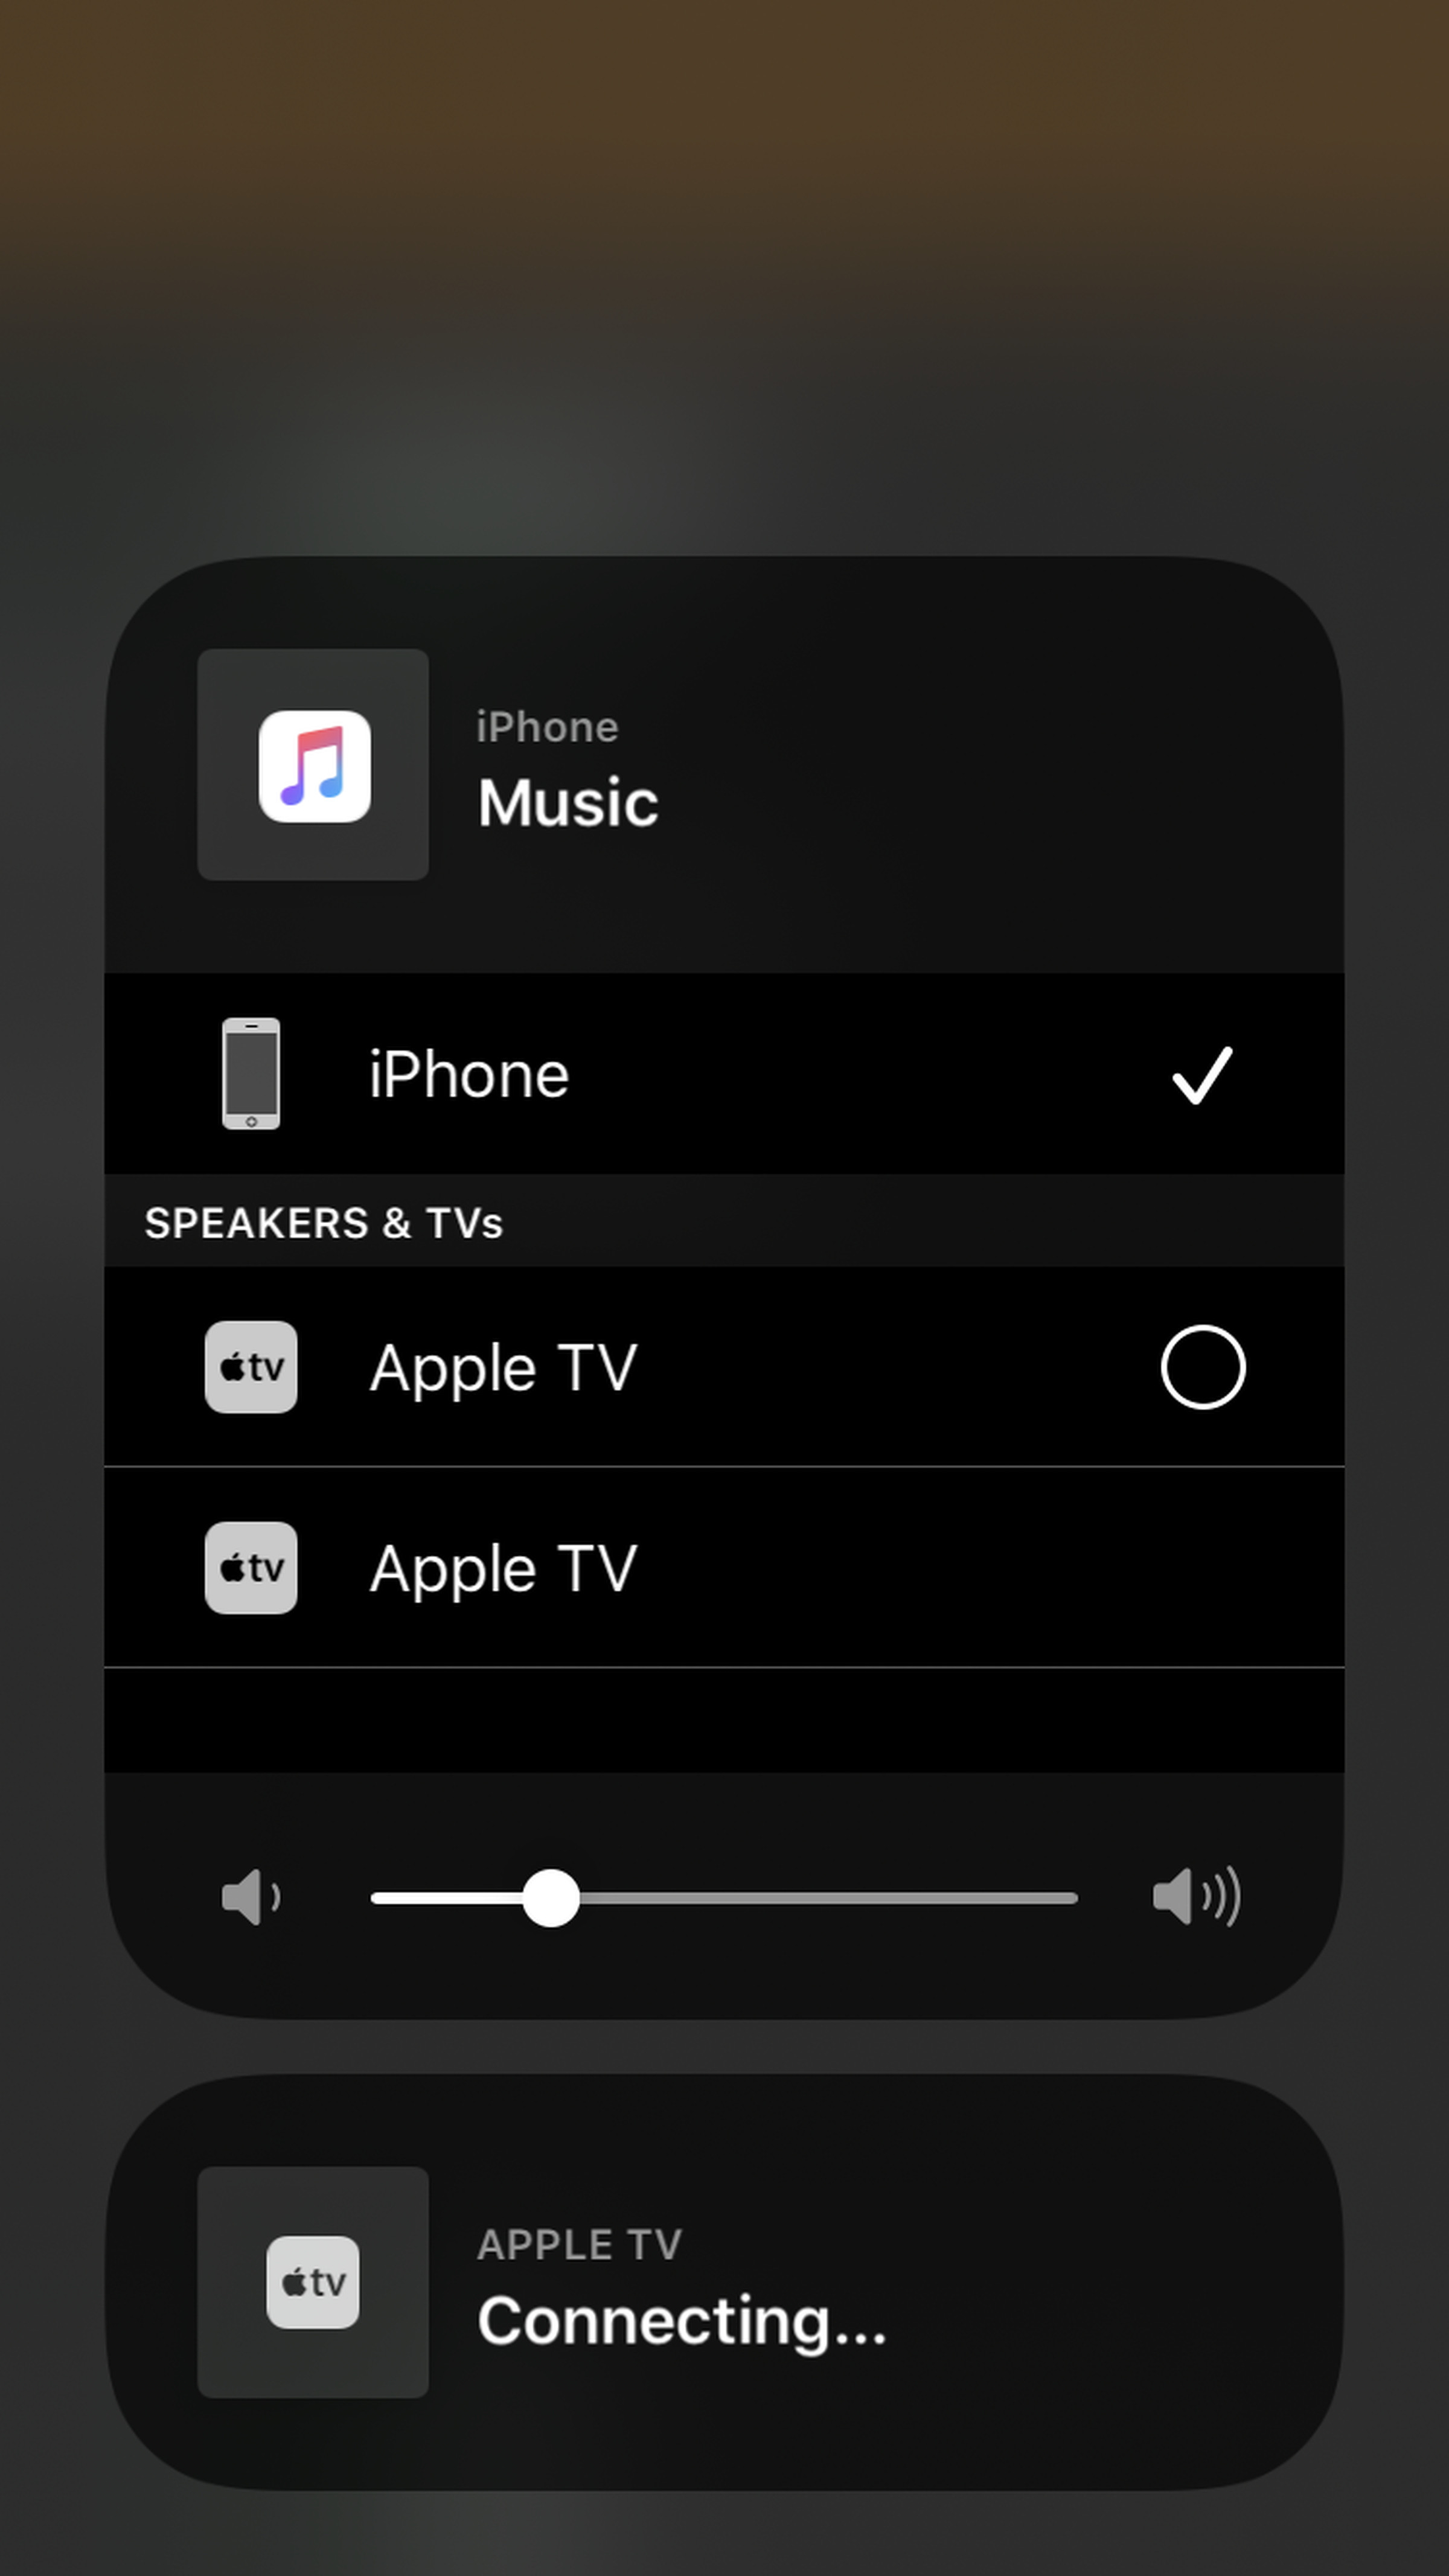 Select which device to use AirPlay with from this screen.